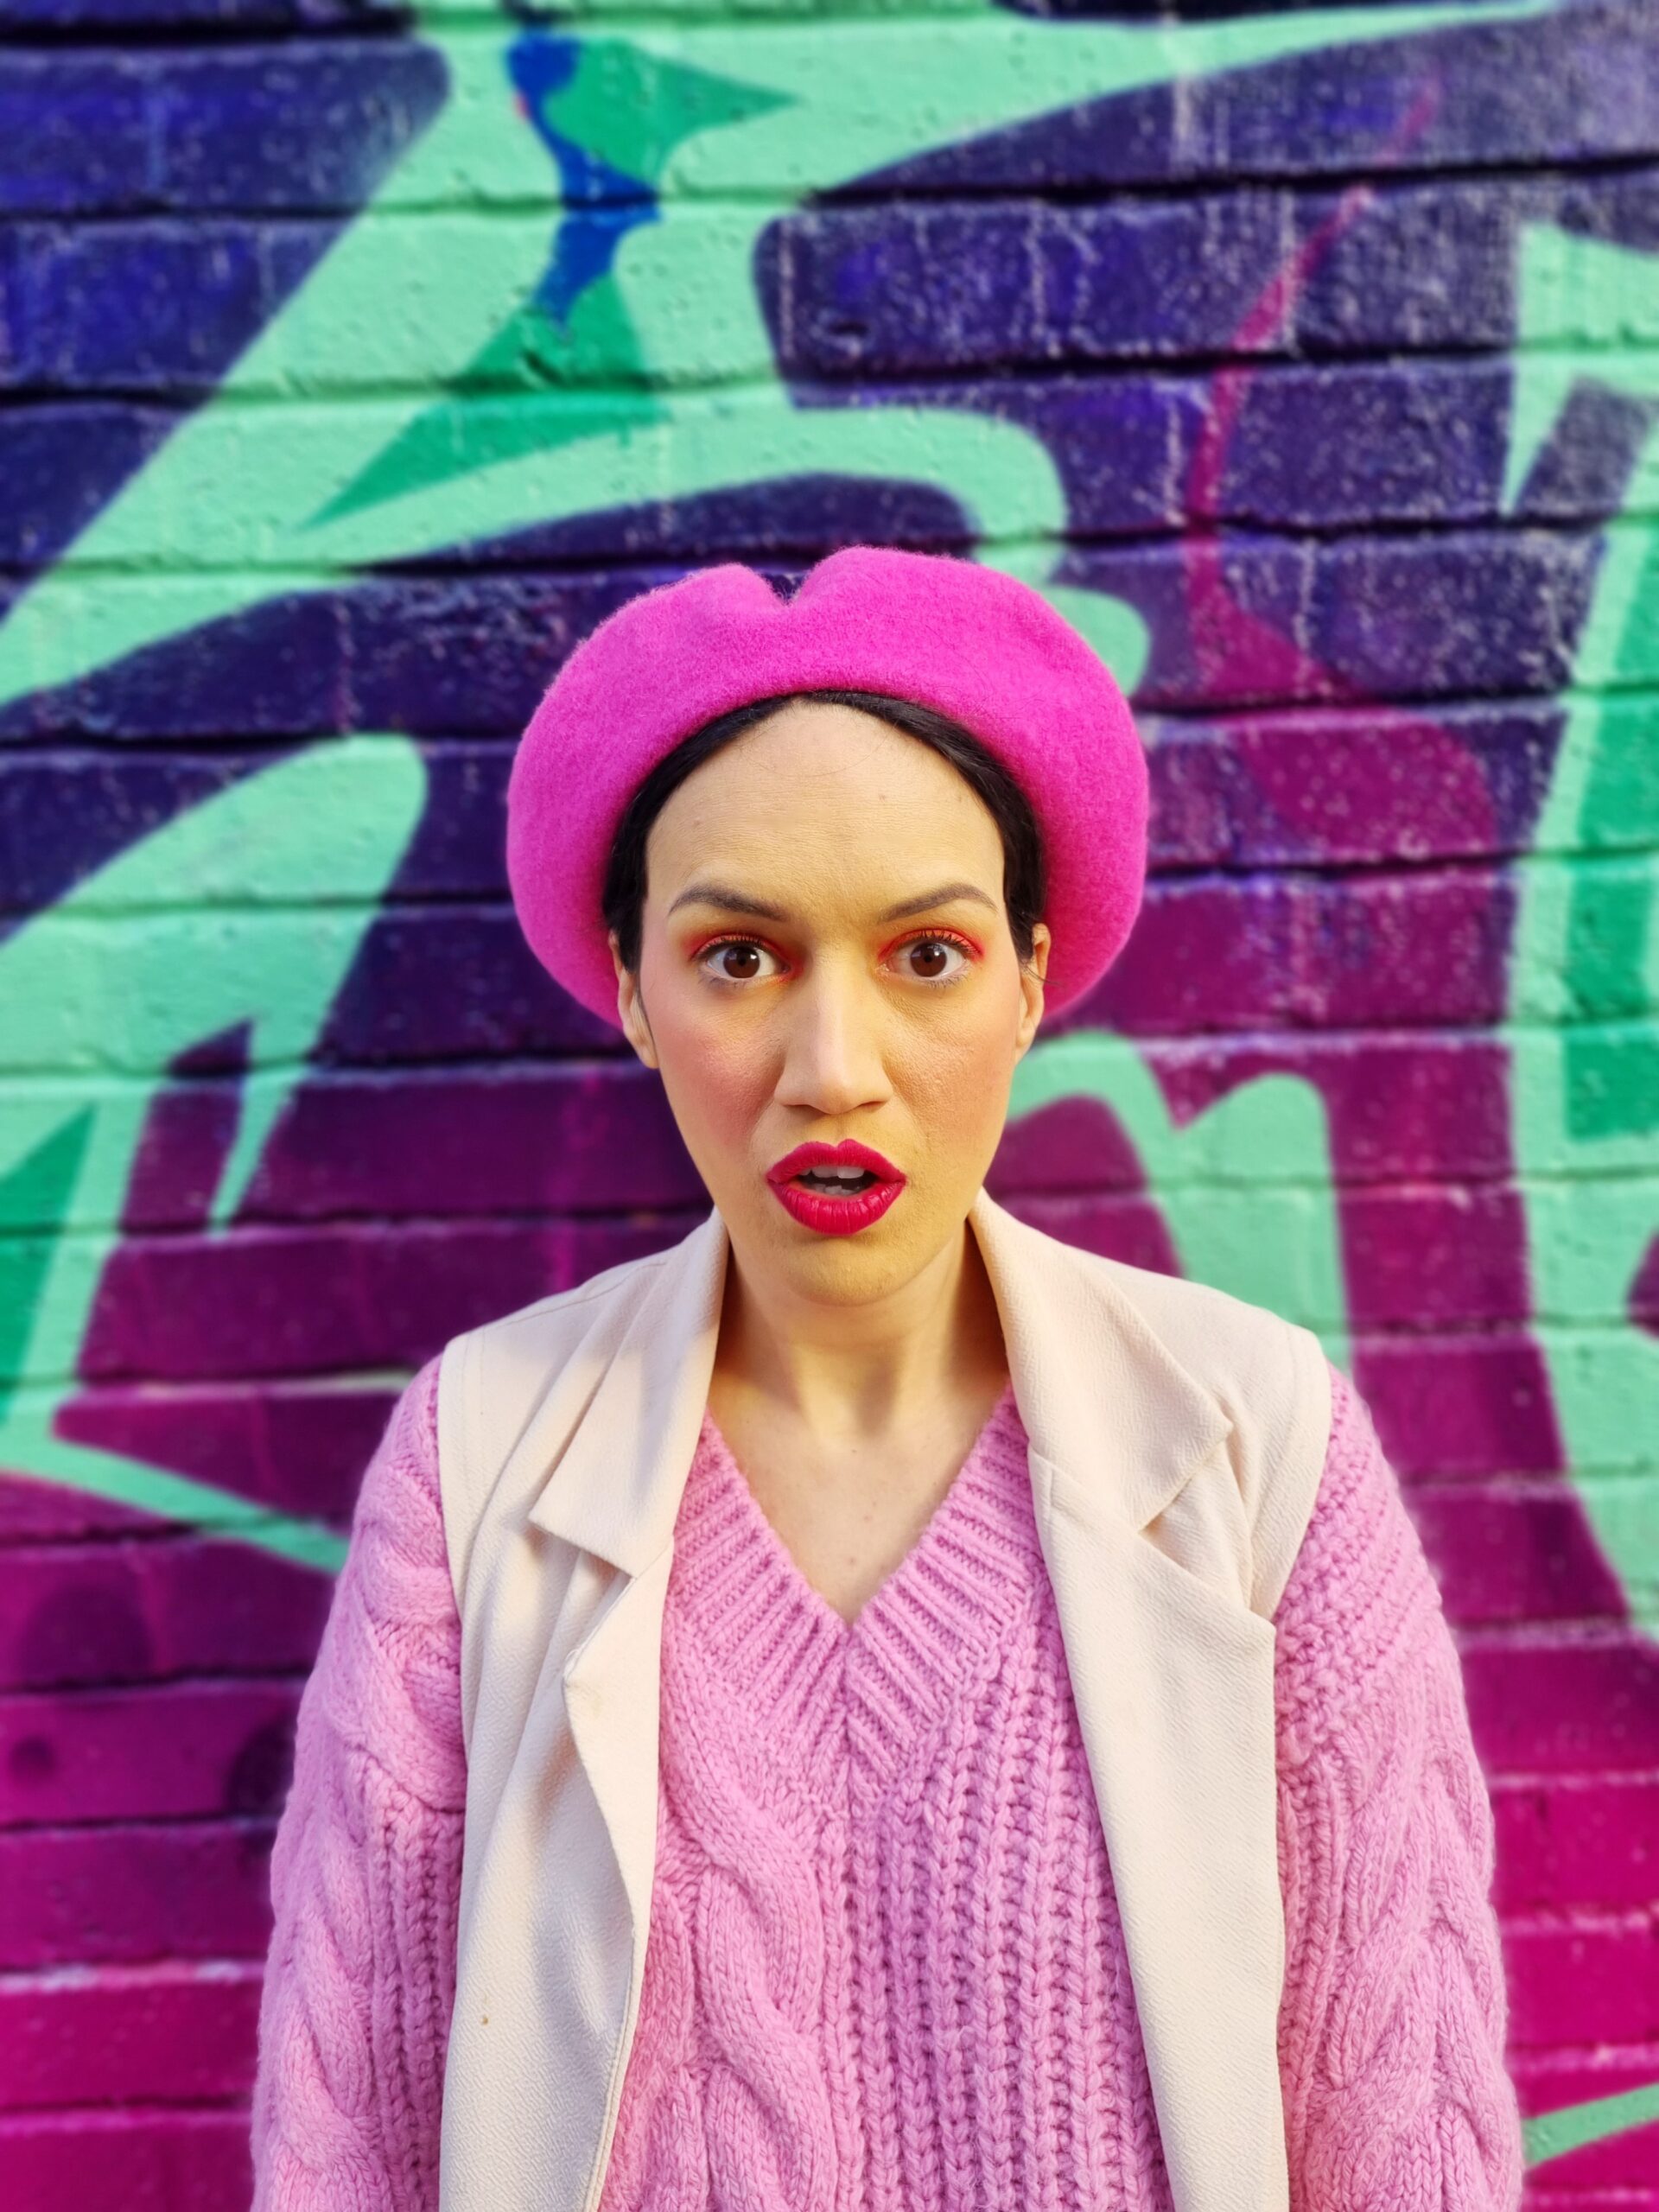 <img src="ana.jpg" alt="ana in pink beret and duster colourful clothes"/>